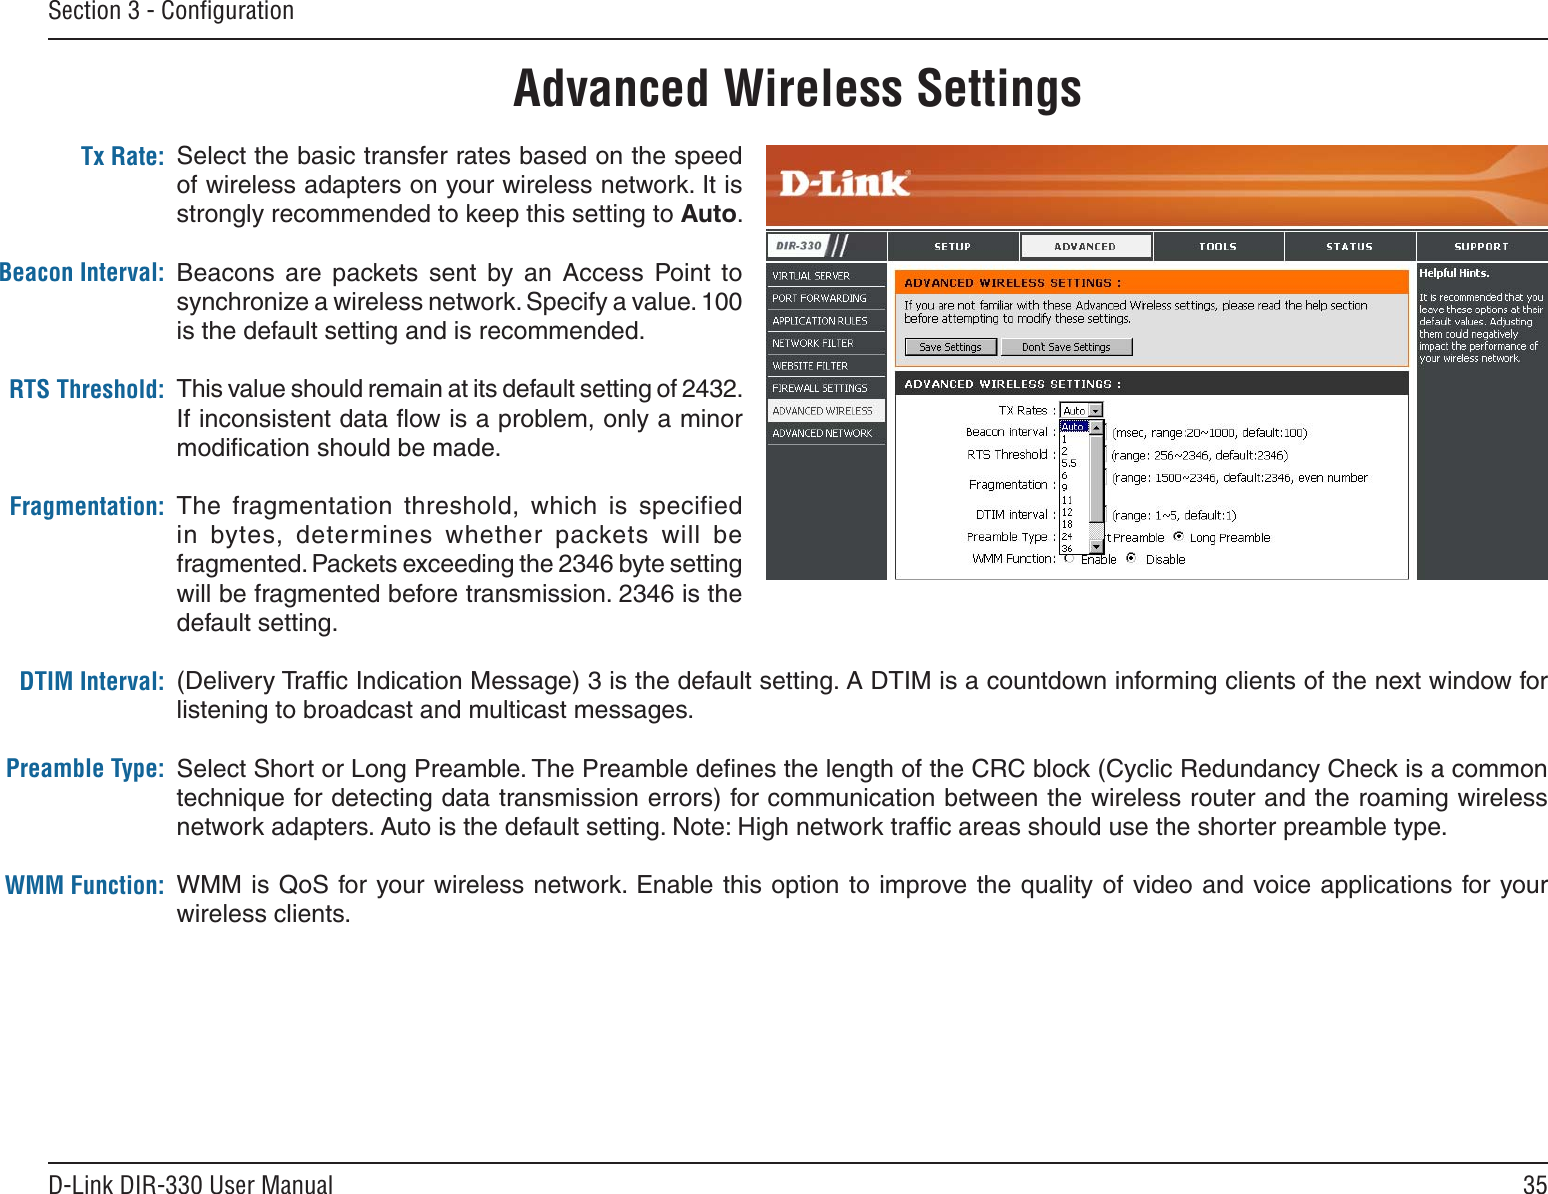 35D-Link DIR-330 User ManualSection 3 - ConﬁgurationTx RatePreambleWMM FunctionAdvanced Wireless SettingsSelect the basic transfer rates based on the speed of wireless adapters on your wireless network. It is strongly recommended to keep this setting to Auto.Beacons  are  packets  sent  by  an  Access  Point  to synchronize a wireless network. Specify a value. 100 is the default setting and is recommended. This value should remain at its default setting of 2432. If inconsistent data ﬂow is a problem, only a minor modiﬁcation should be made.The  fragmentation  threshold,  which  is  specified in  bytes,  determines  whether  packets  will  be fragmented. Packets exceeding the 2346 byte setting will be fragmented before transmission. 2346 is the default setting. (Delivery Trafﬁc Indication Message) 3 is the default setting. A DTIM is a countdown informing clients of the next window for listening to broadcast and multicast messages.Select Short or Long Preamble. The Preamble deﬁnes the length of the CRC block (Cyclic Redundancy Check is a common technique for detecting data transmission errors) for communication between the wireless router and the roaming wireless network adapters. Auto is the default setting. Note: High network trafﬁc areas should use the shorter preamble type.WMM is QoS for your wireless network. Enable this option to  improve the  quality of video and  voice applications for your wireless clients.Tx Rate:Beacon Interval:RTS Threshold:Fragmentation:DTIM Interval:Preamble Type:WMM Function: